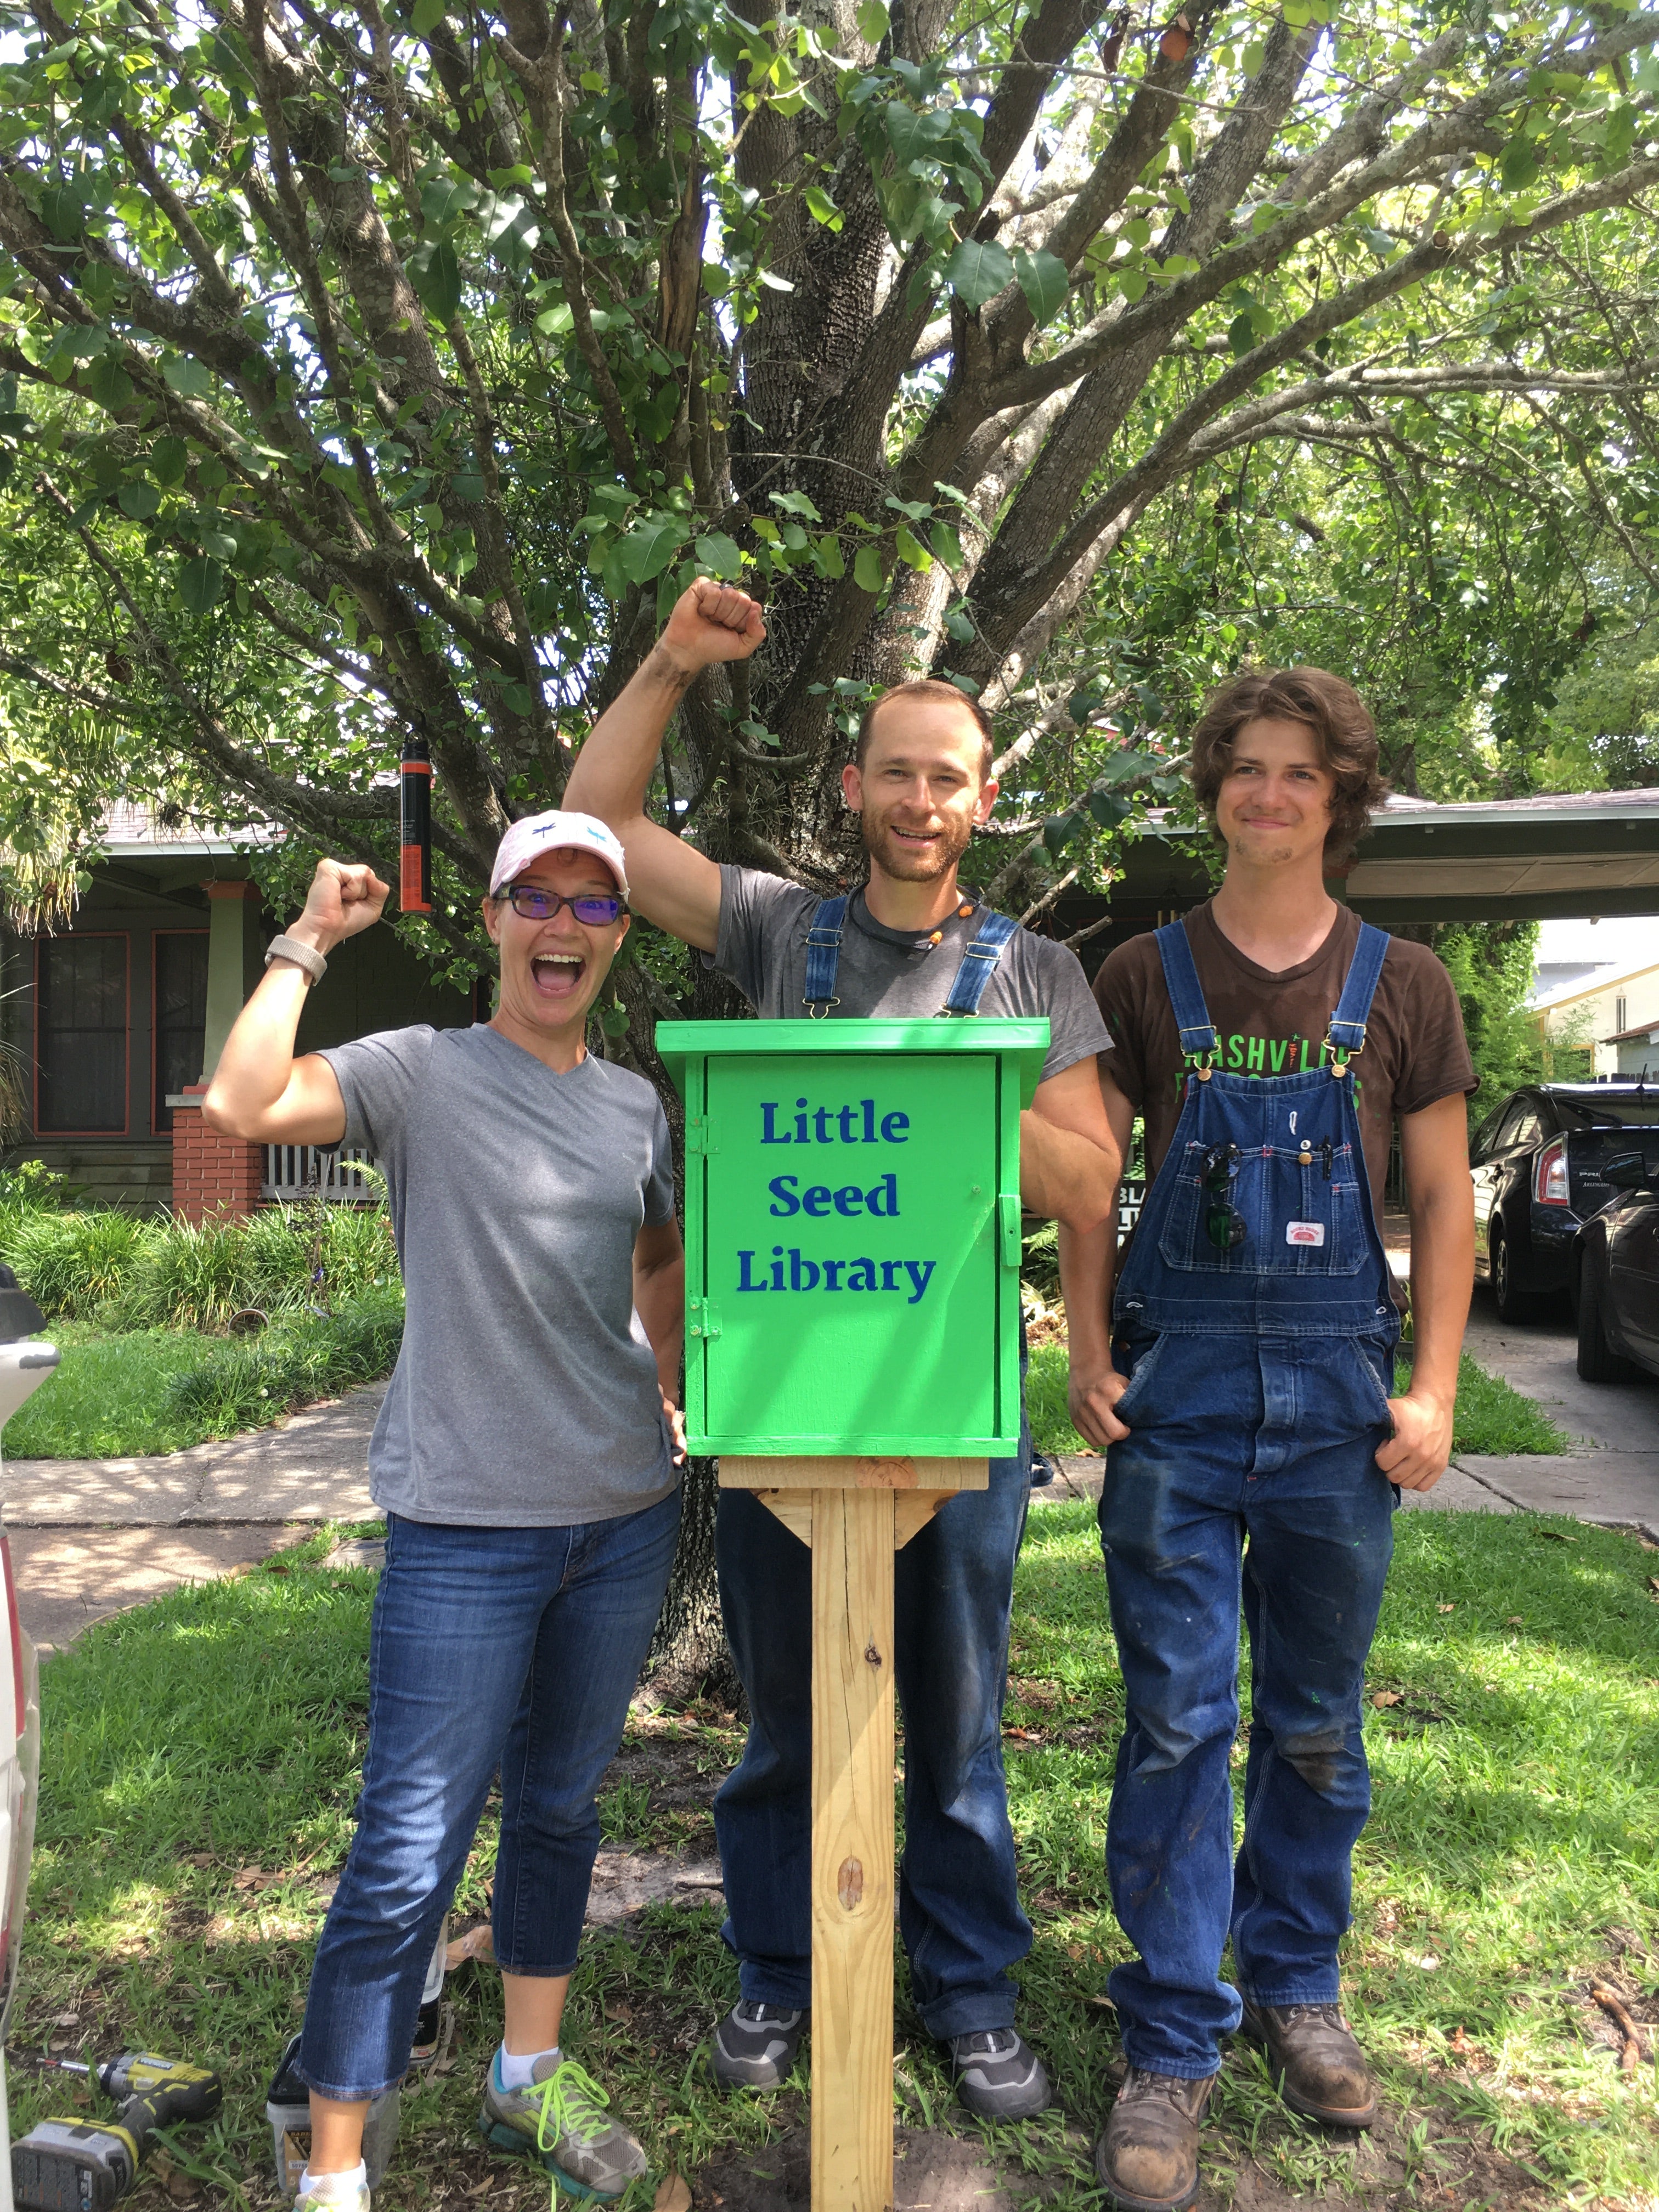 Little Seed Library